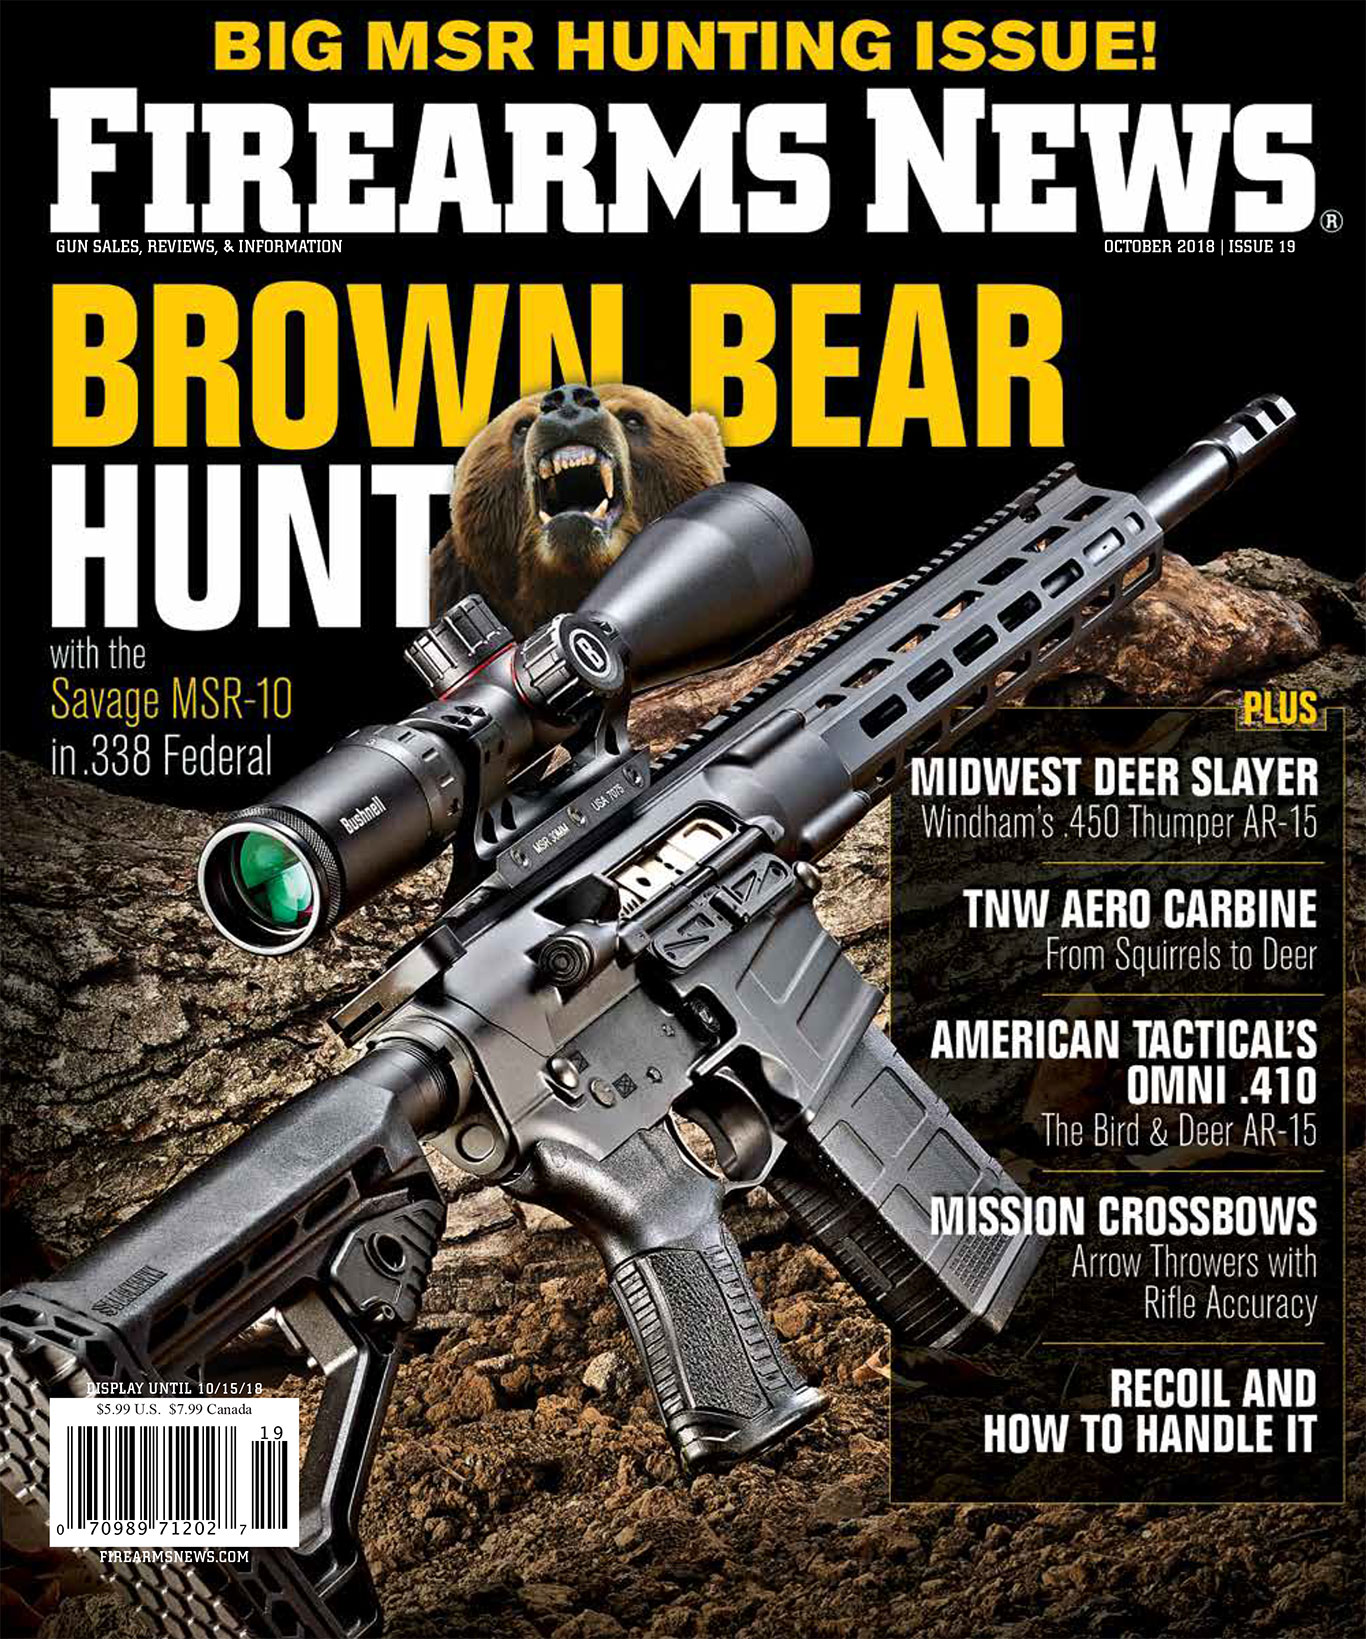 Firearms-News-MSR-issue19-COVER